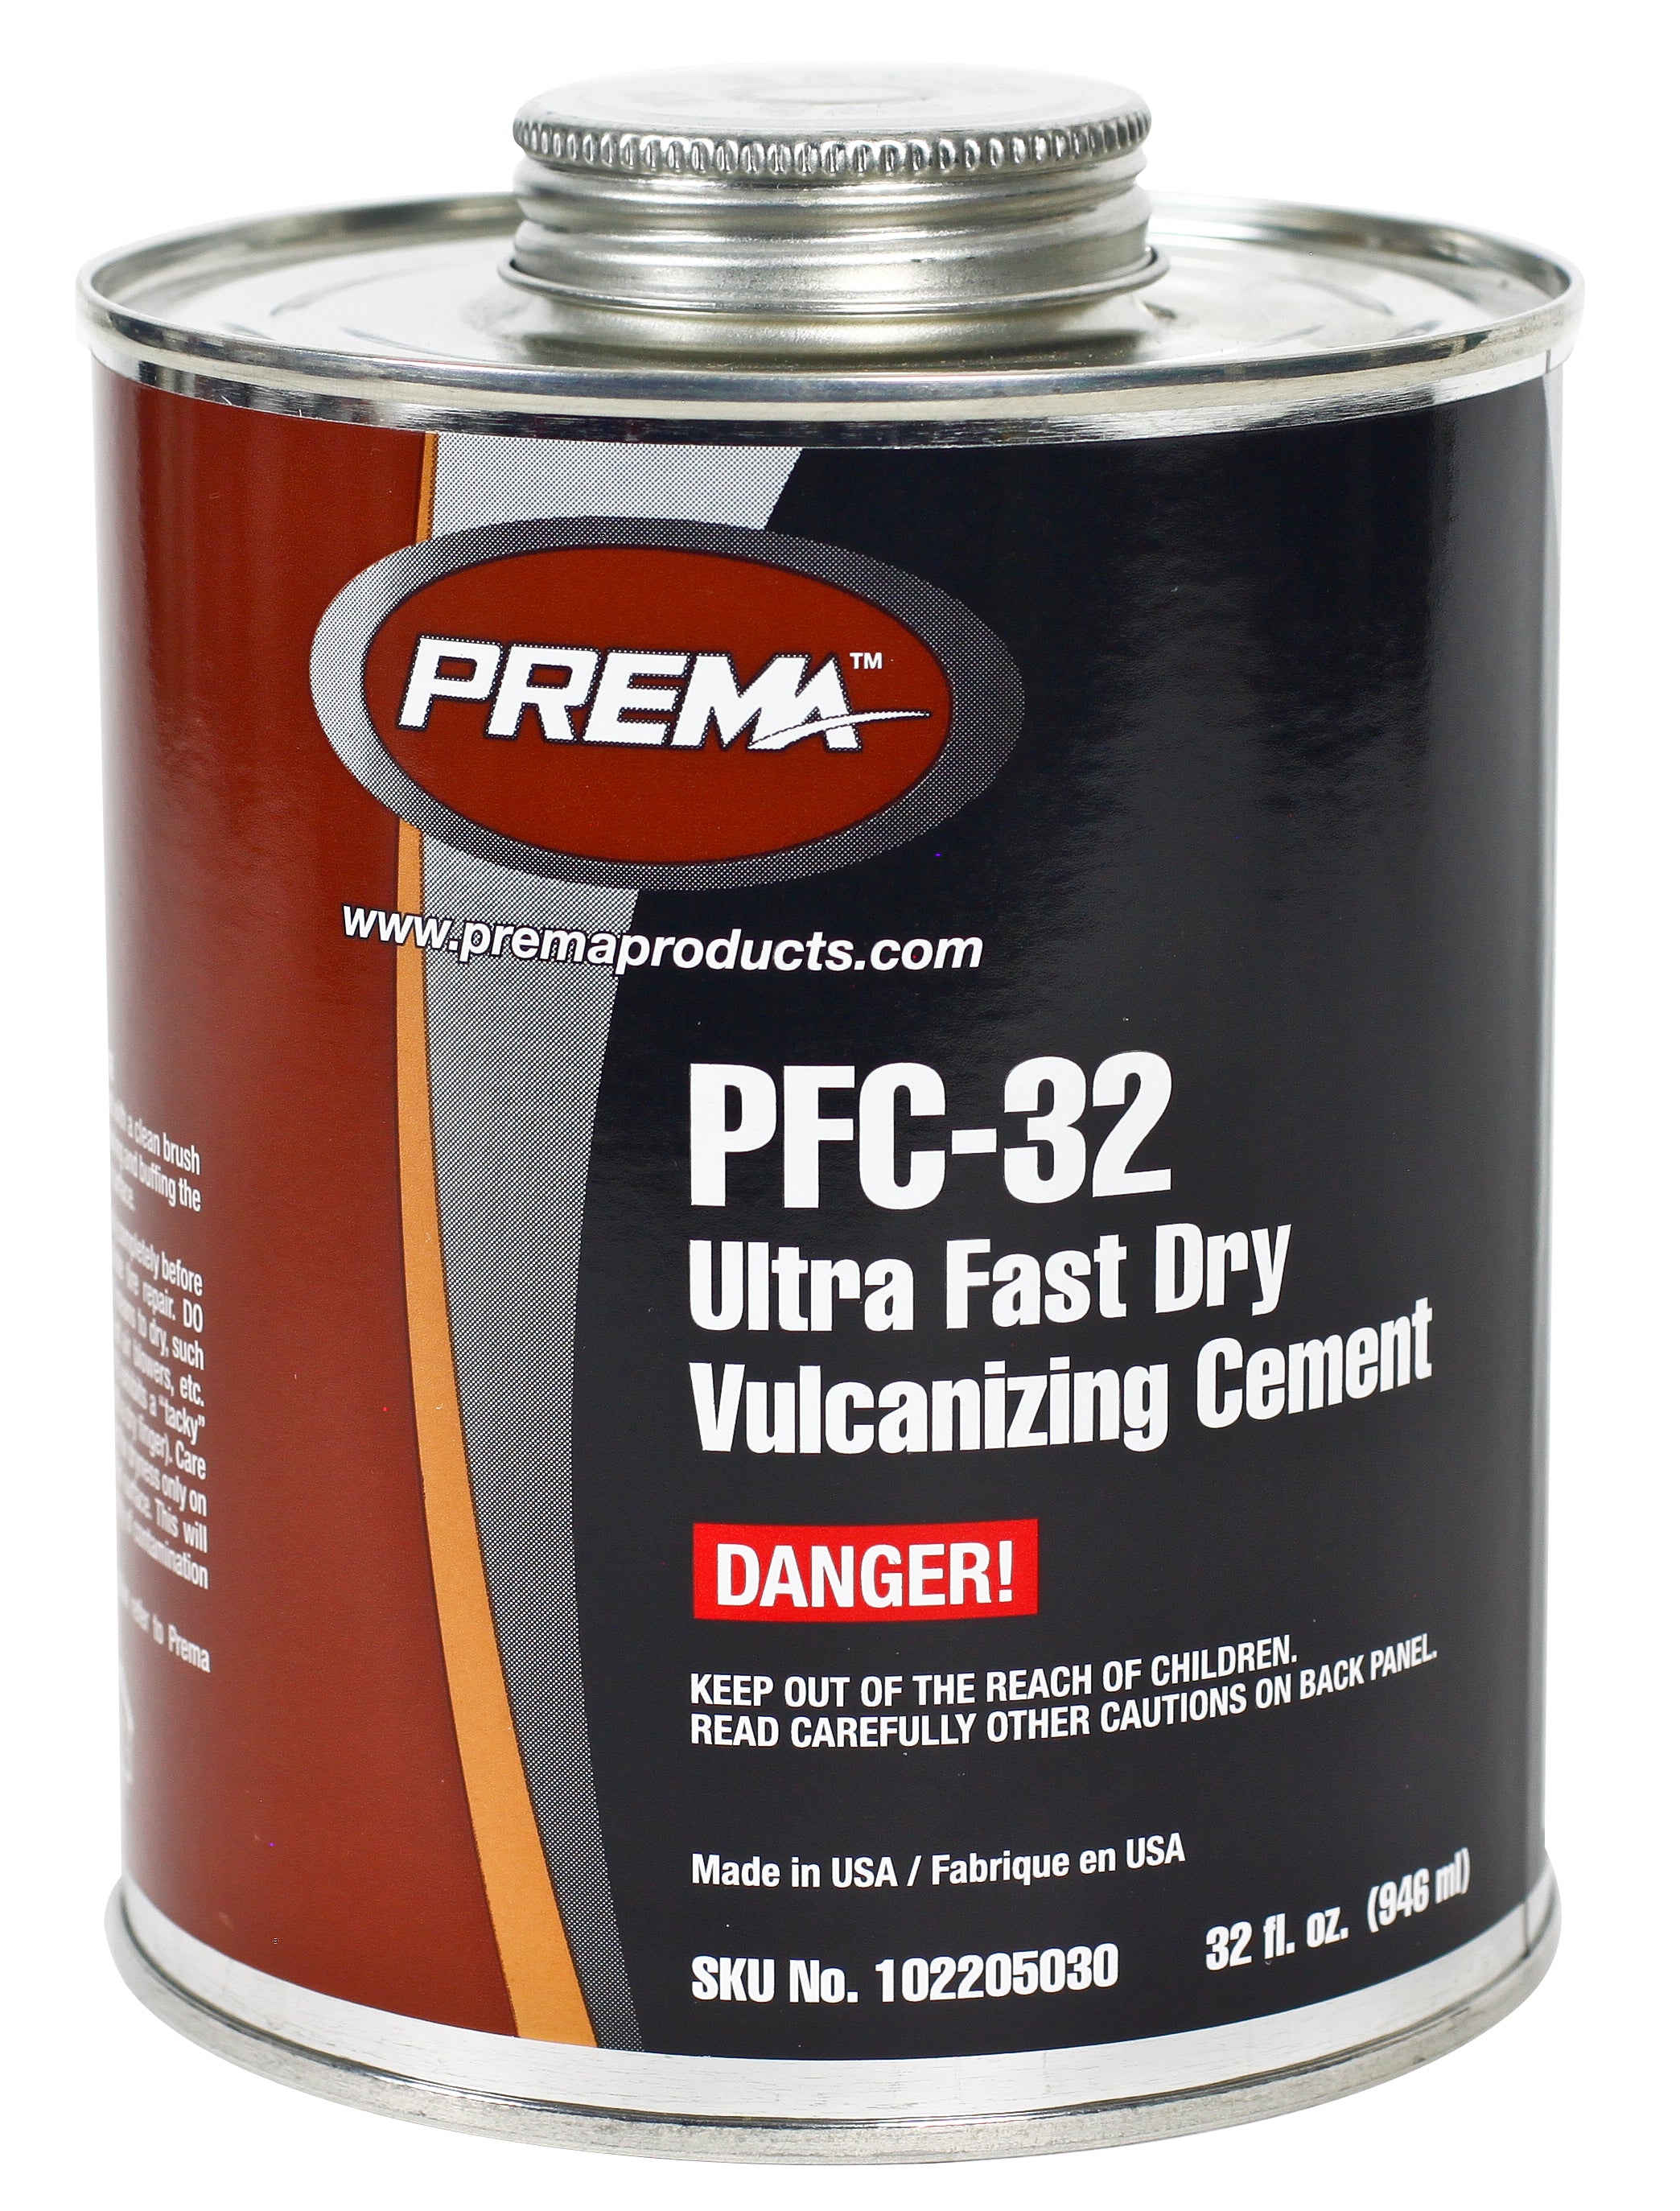 Prema PFC-32 Cement, (Clear Universal), 32 oz Brush Top Can (Flammable)  - Ultra Fast Dry